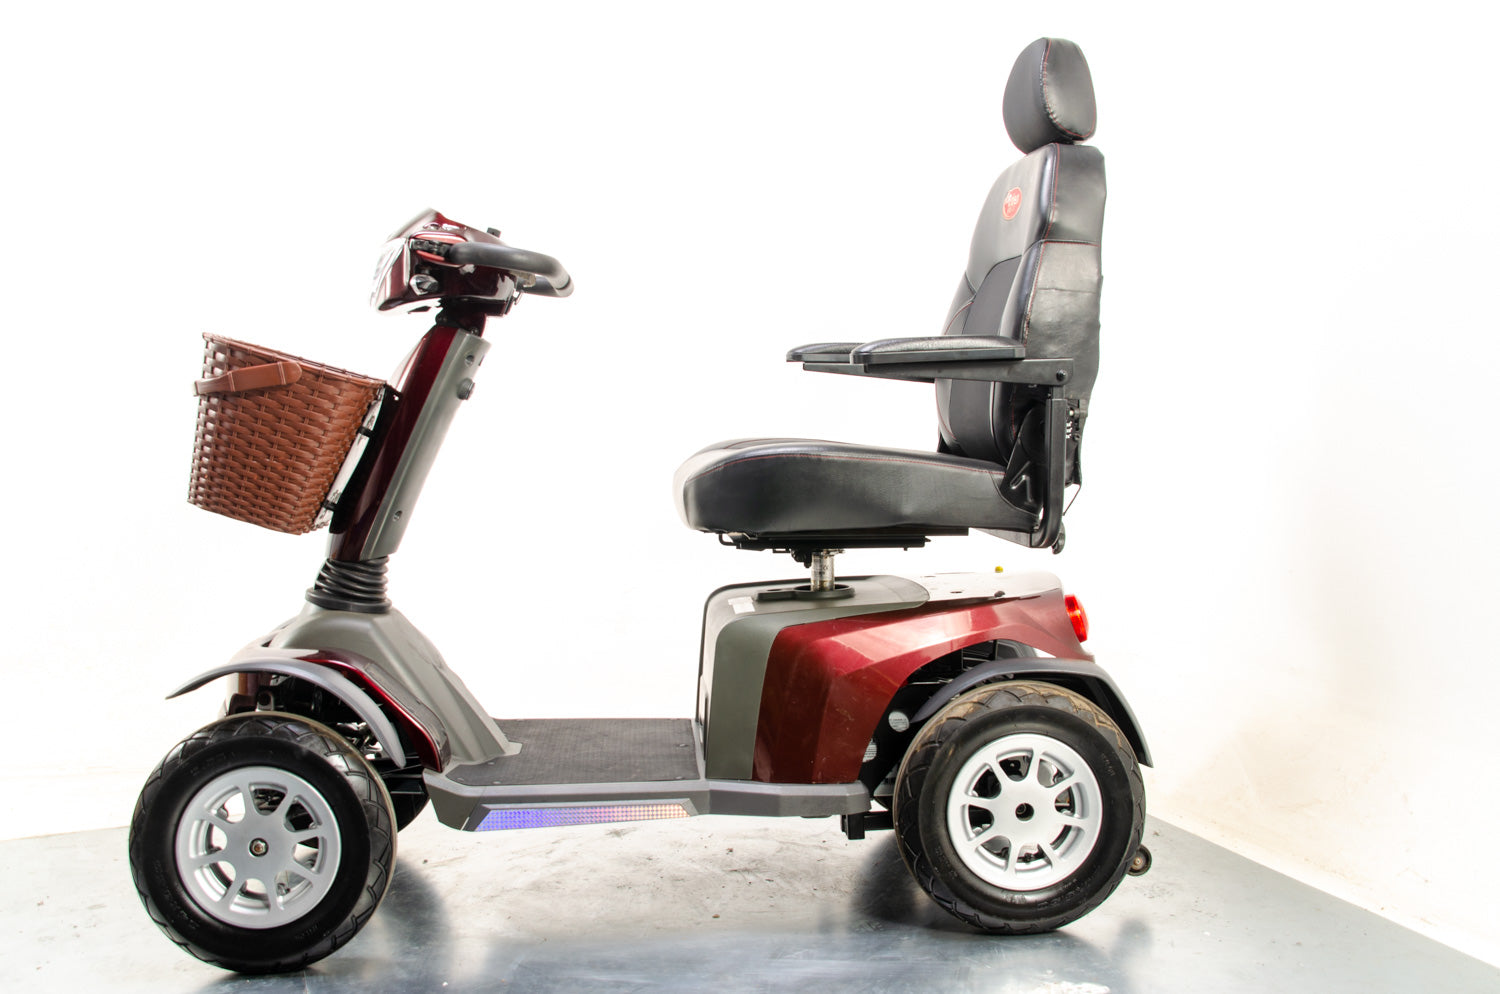 Products Eden Roadmaster Plus All-Terrain Off-Road Used Mobility Scooter 8mph Luxury Electric Large  13641